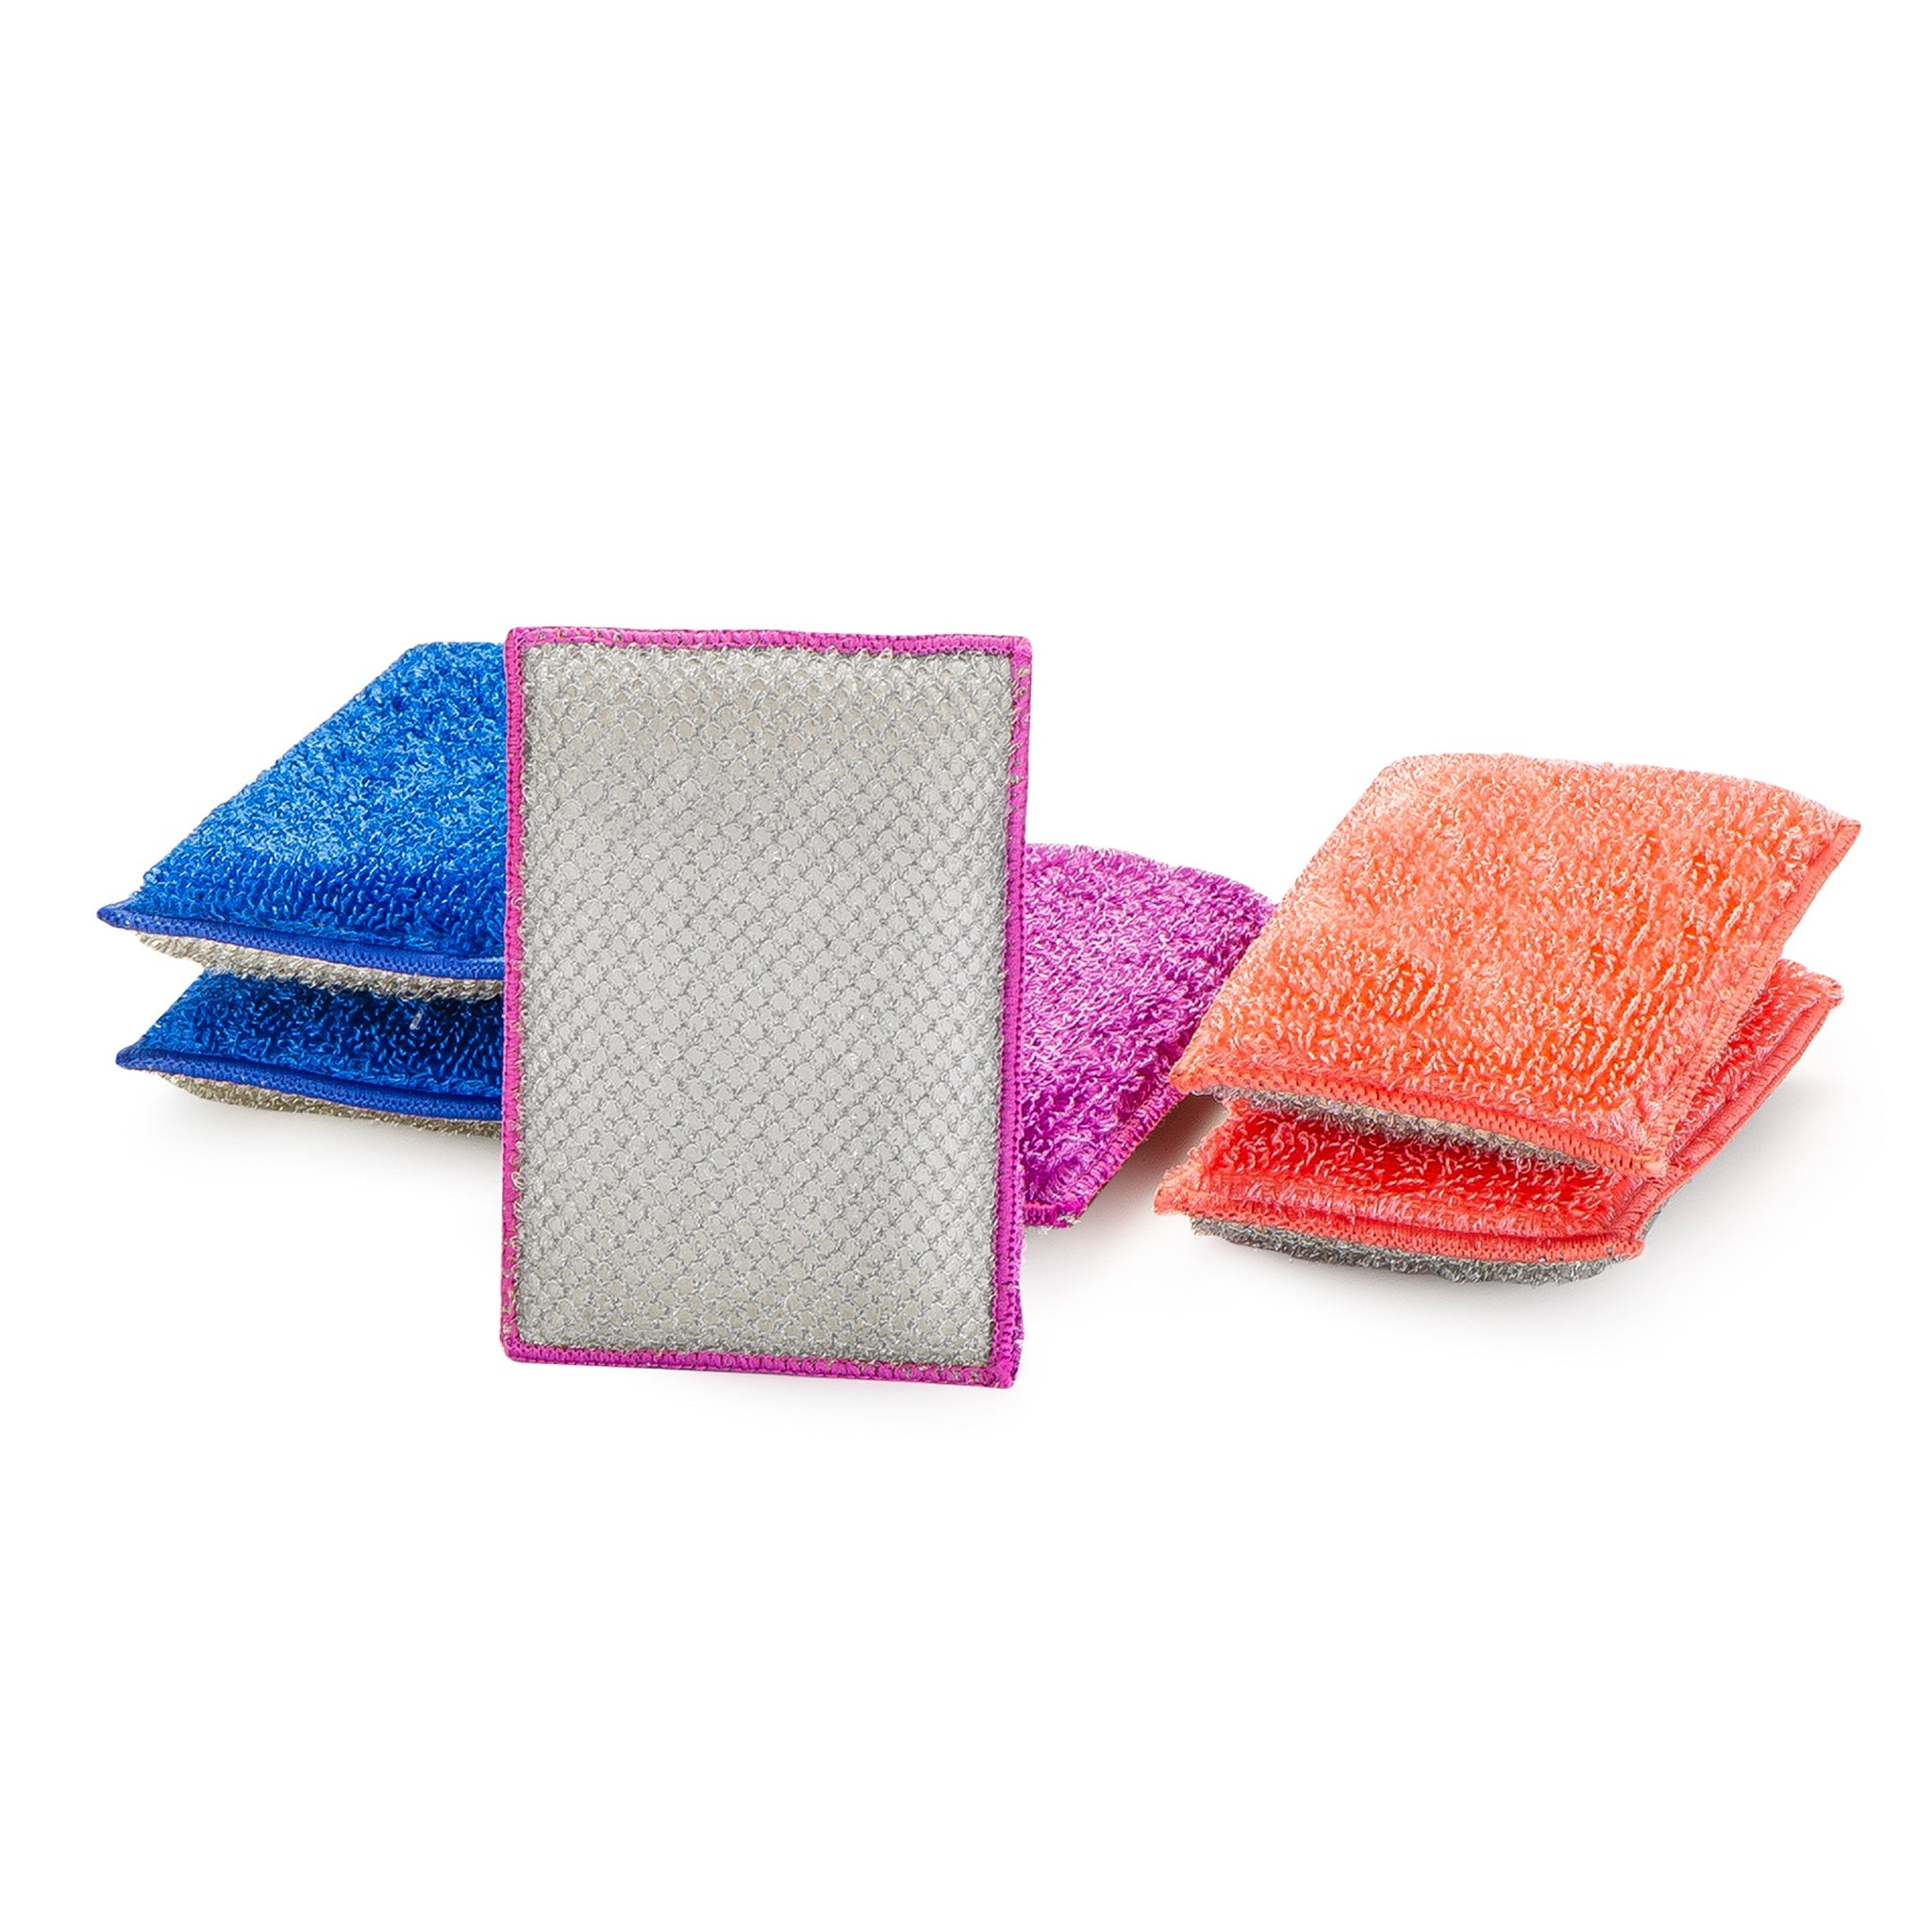 https://cdn.shopify.com/s/files/1/2393/7799/products/non-scratch-scrub-sponge-with-bamboo-odorless-rayon-fiber-smart-design-cleaning-7001118-incrementing-number-376121.jpg?v=1679339629